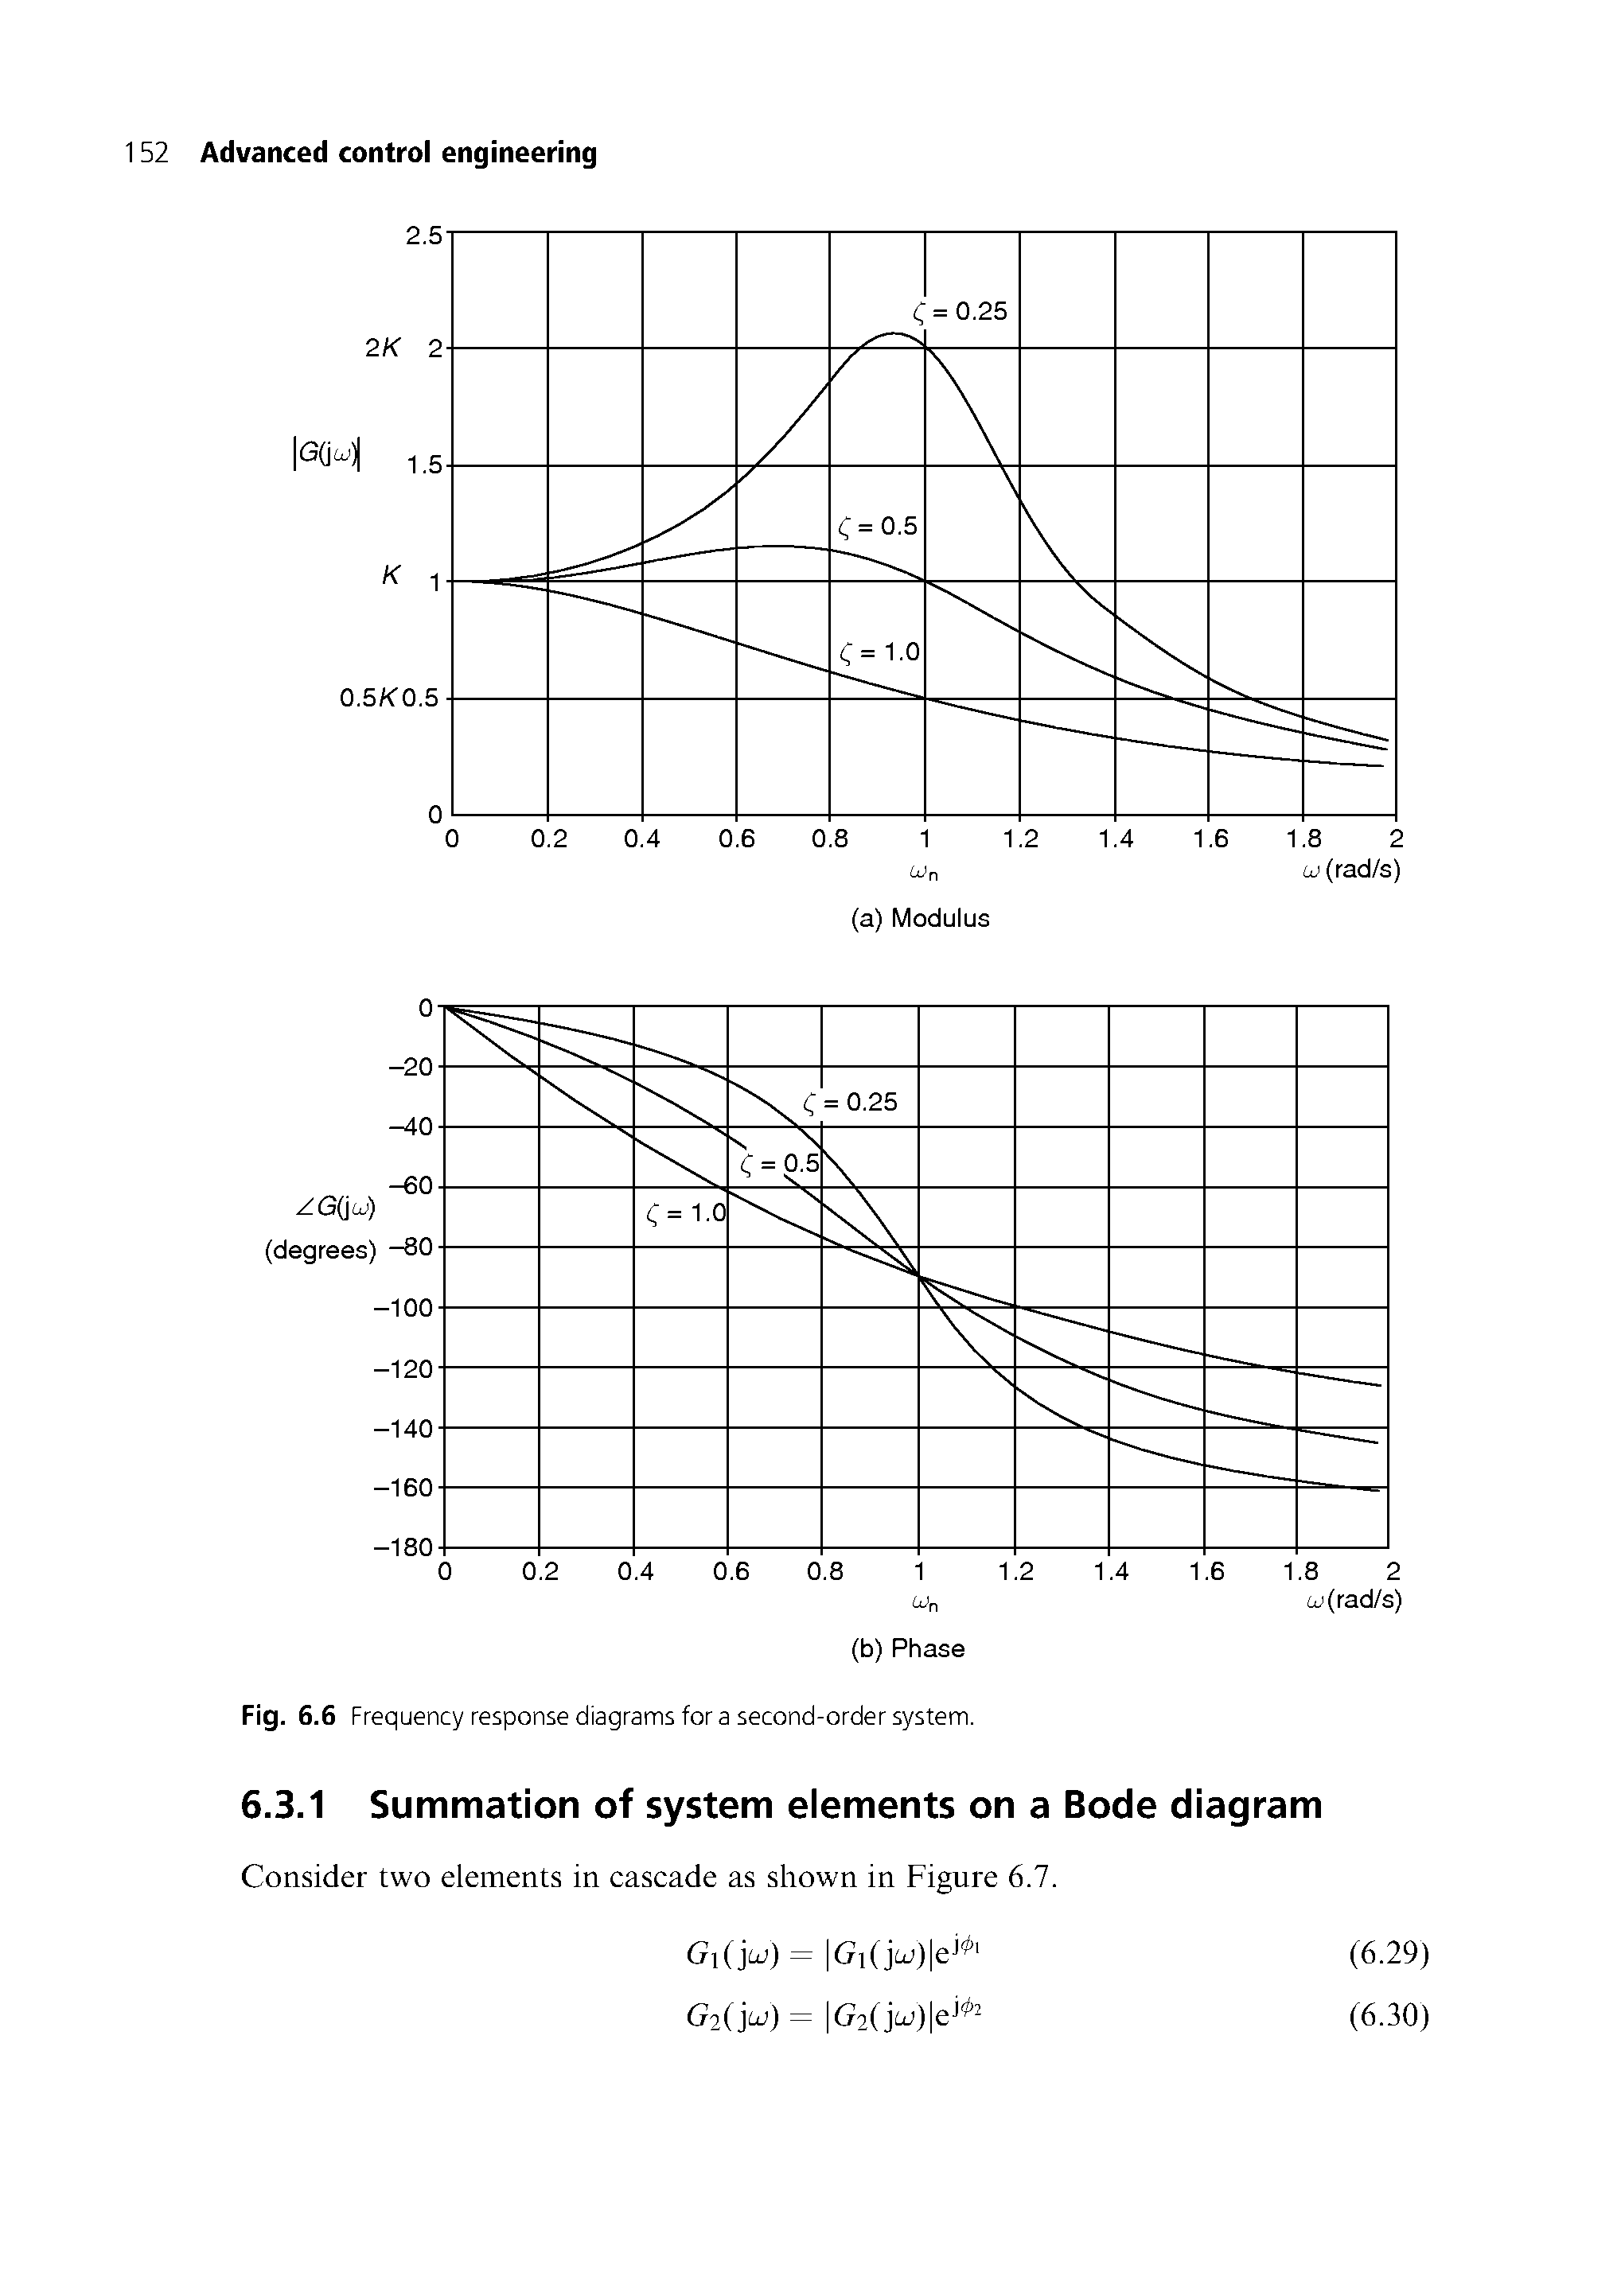 Fig. 6.6 Frequency response diagrams for a second-order system.